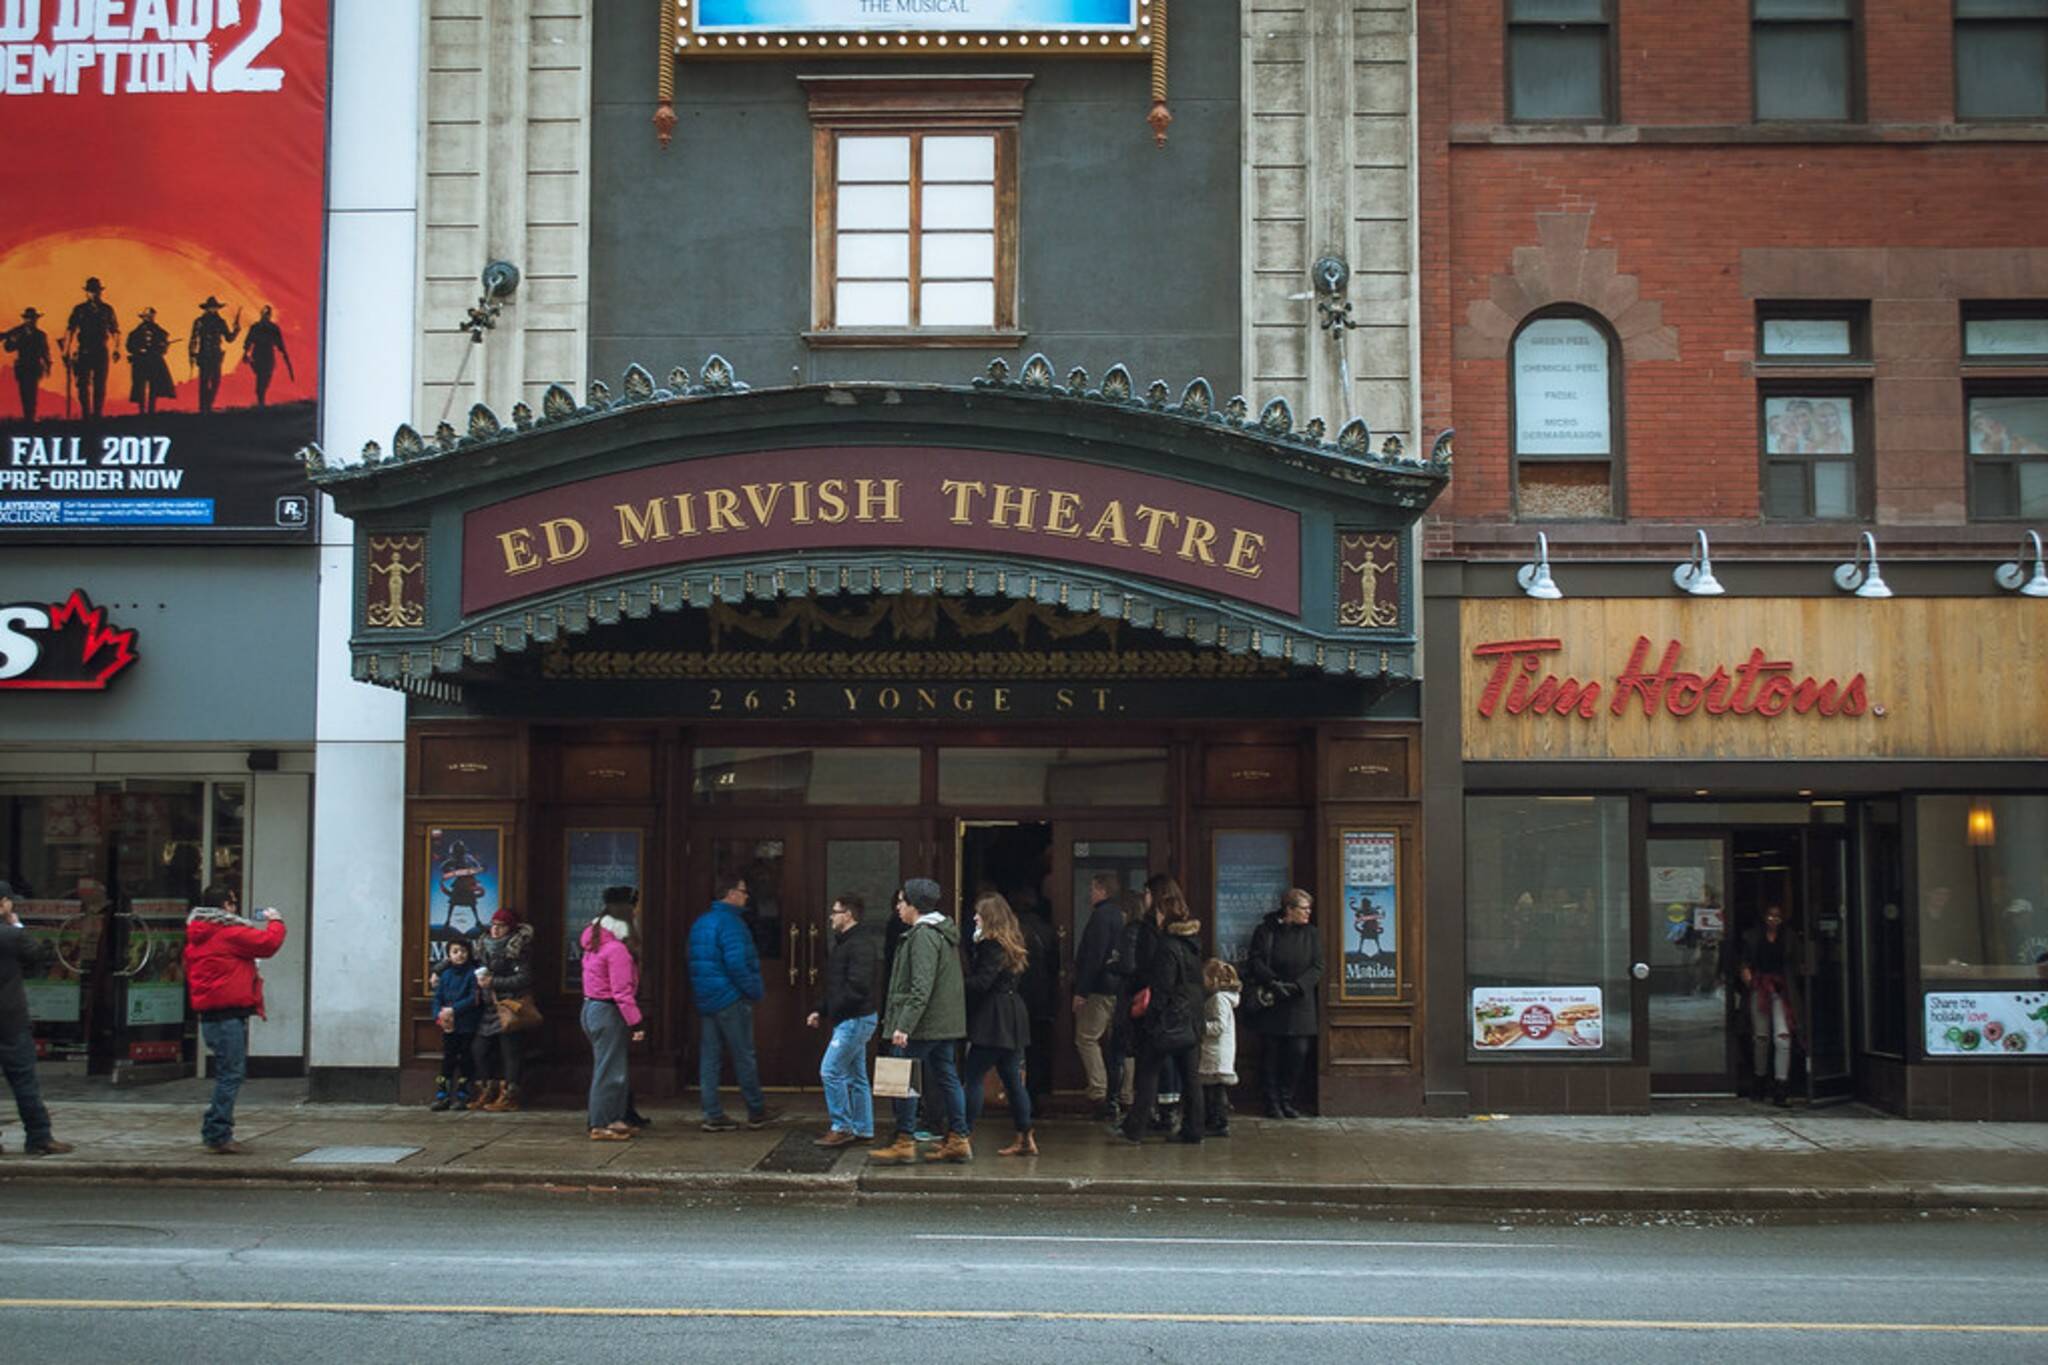 This is when Mirvish theatres will reopen in Toronto